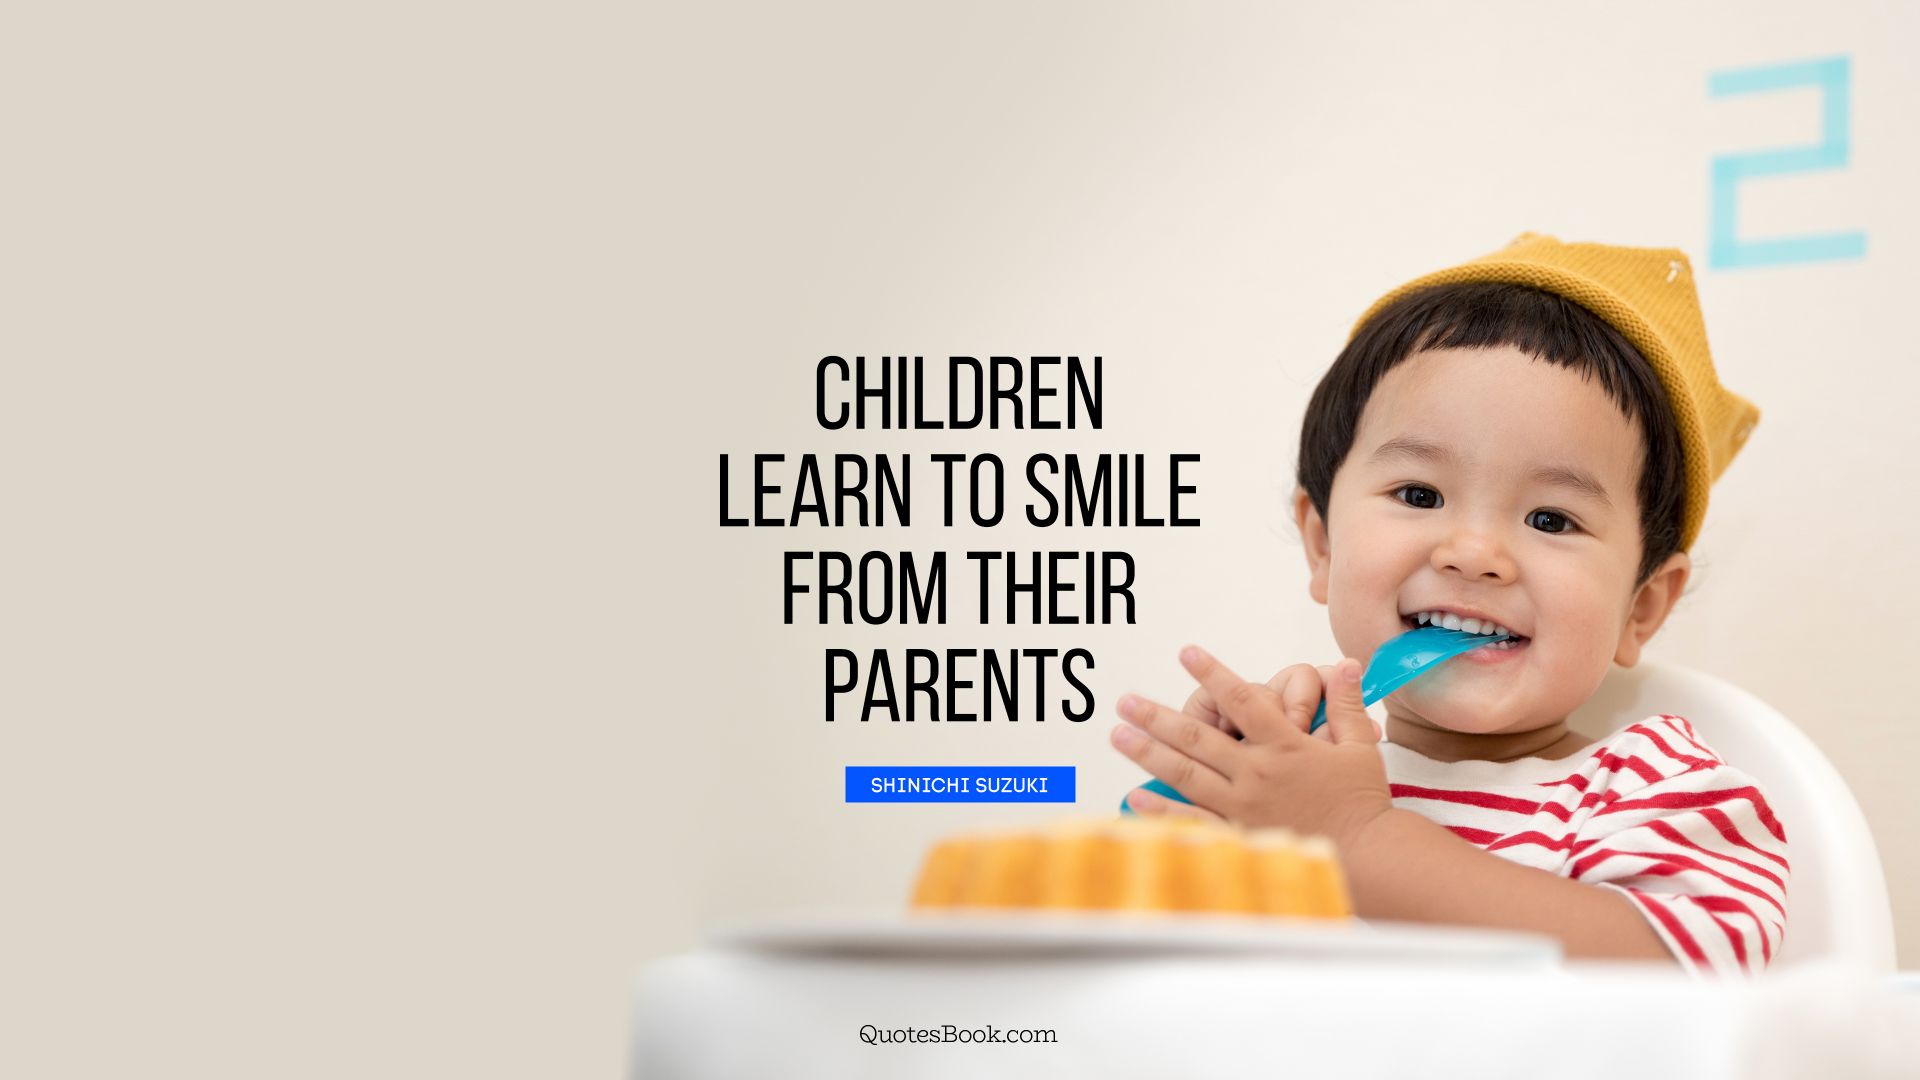 Children learn to smile from their parents. - Quote by Shinichi Suzuki